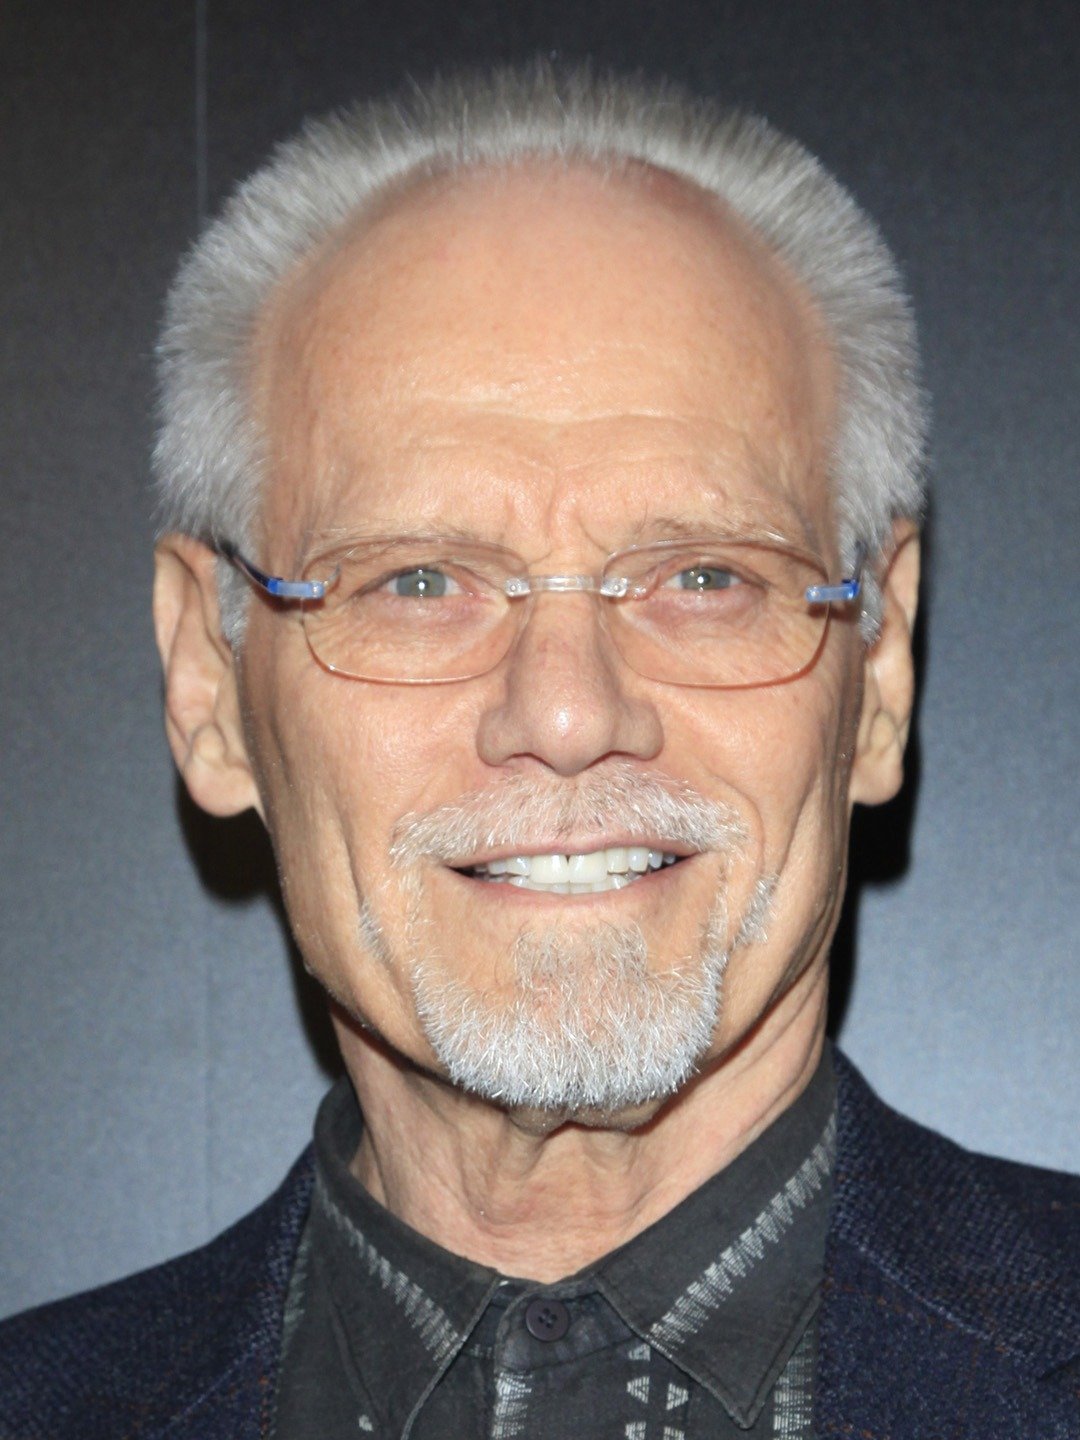 How tall is Fred Dryer?